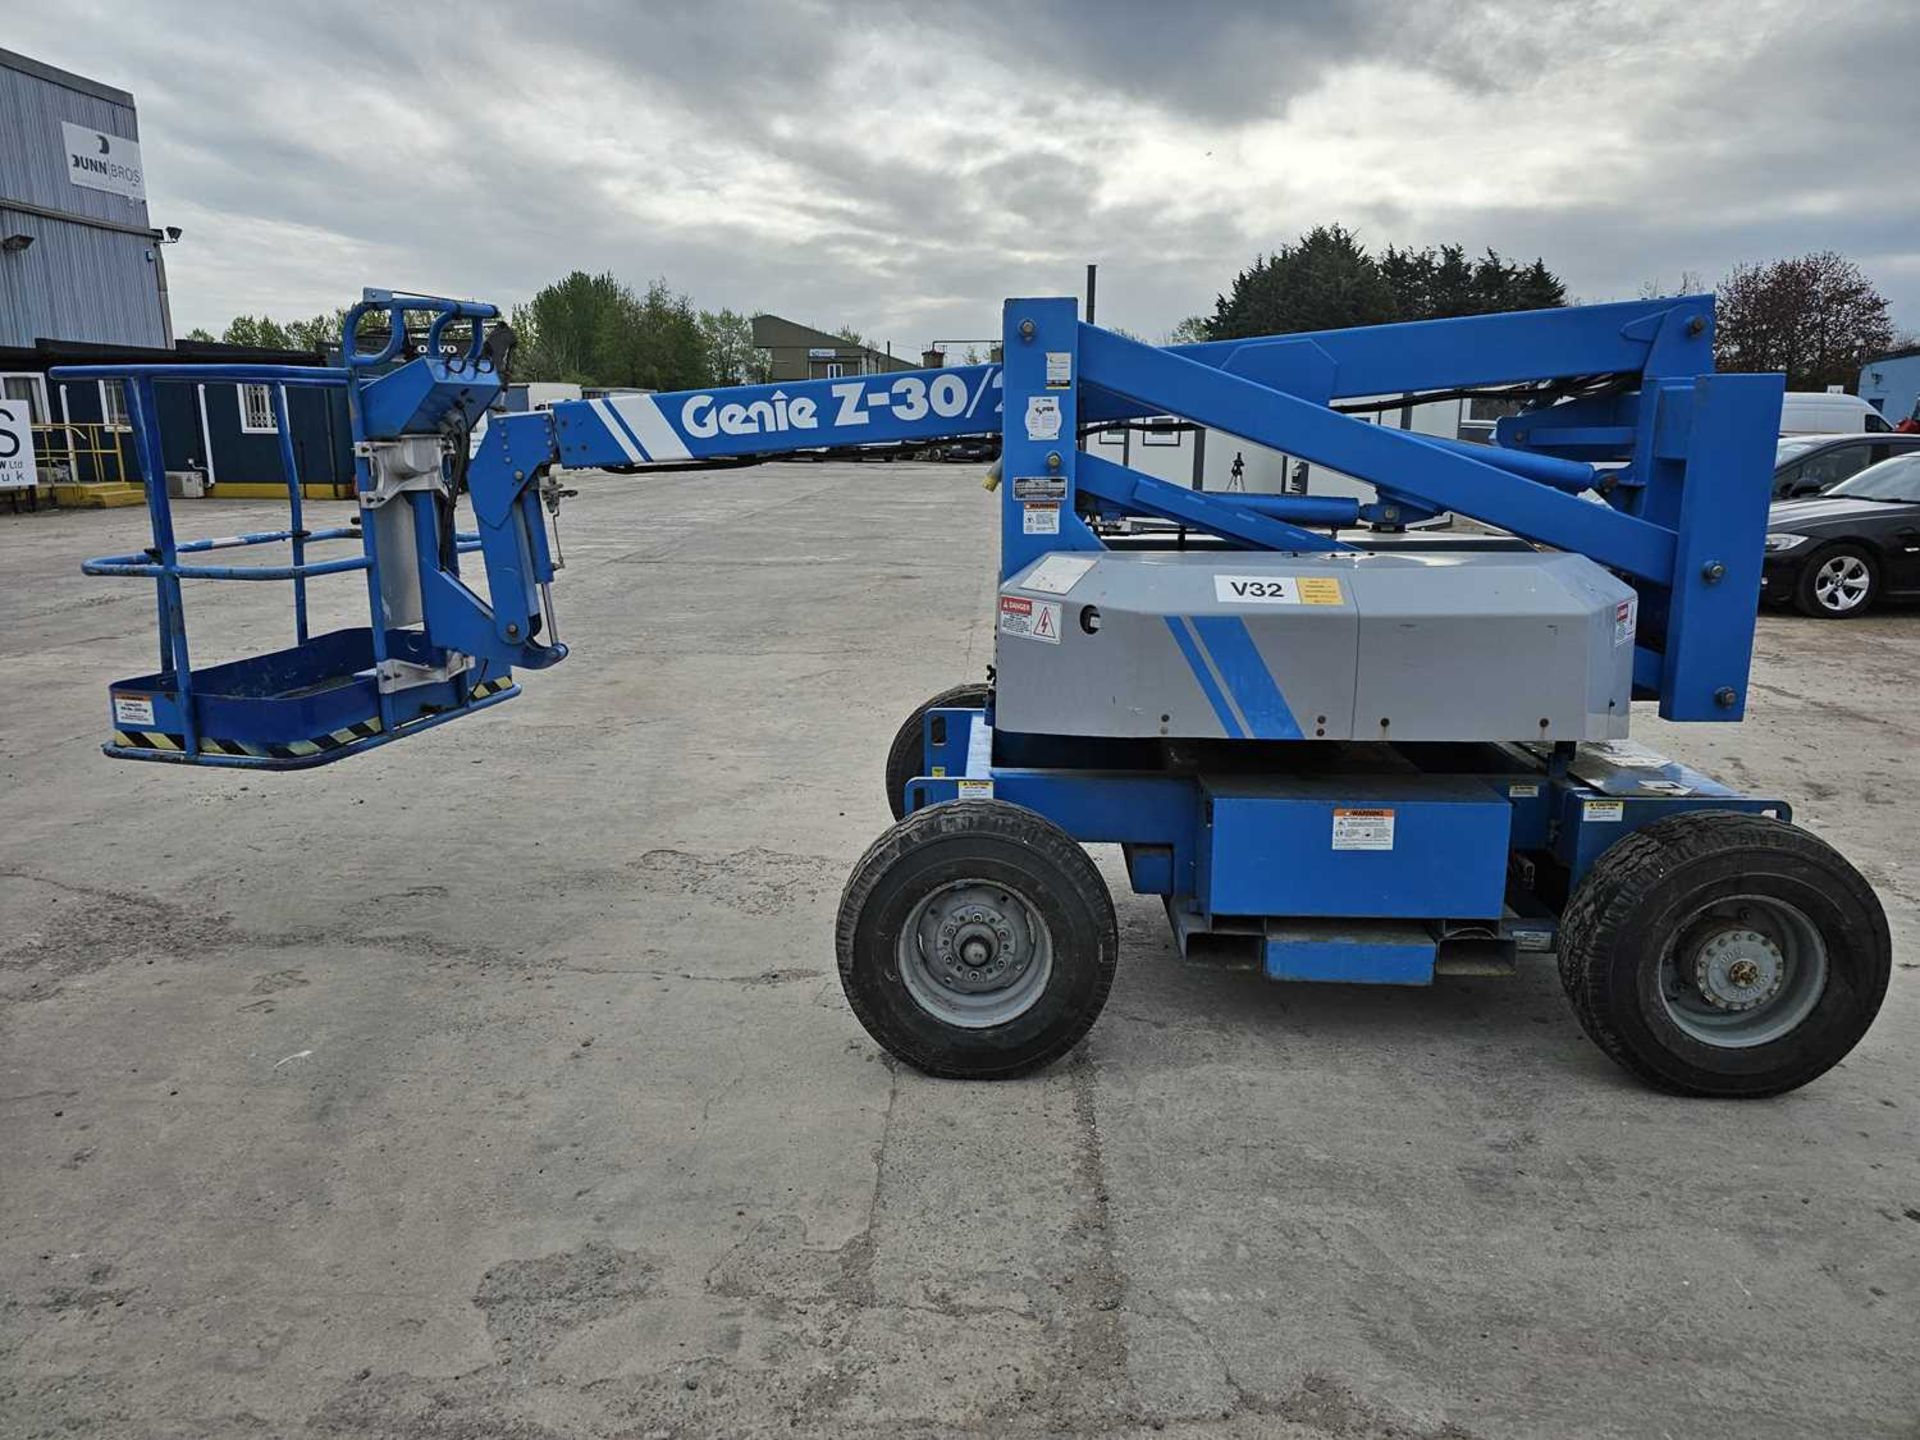 Genie Z30/20HD Wheeled Articulated Electric Scissor Lift Access Platform - Image 3 of 17